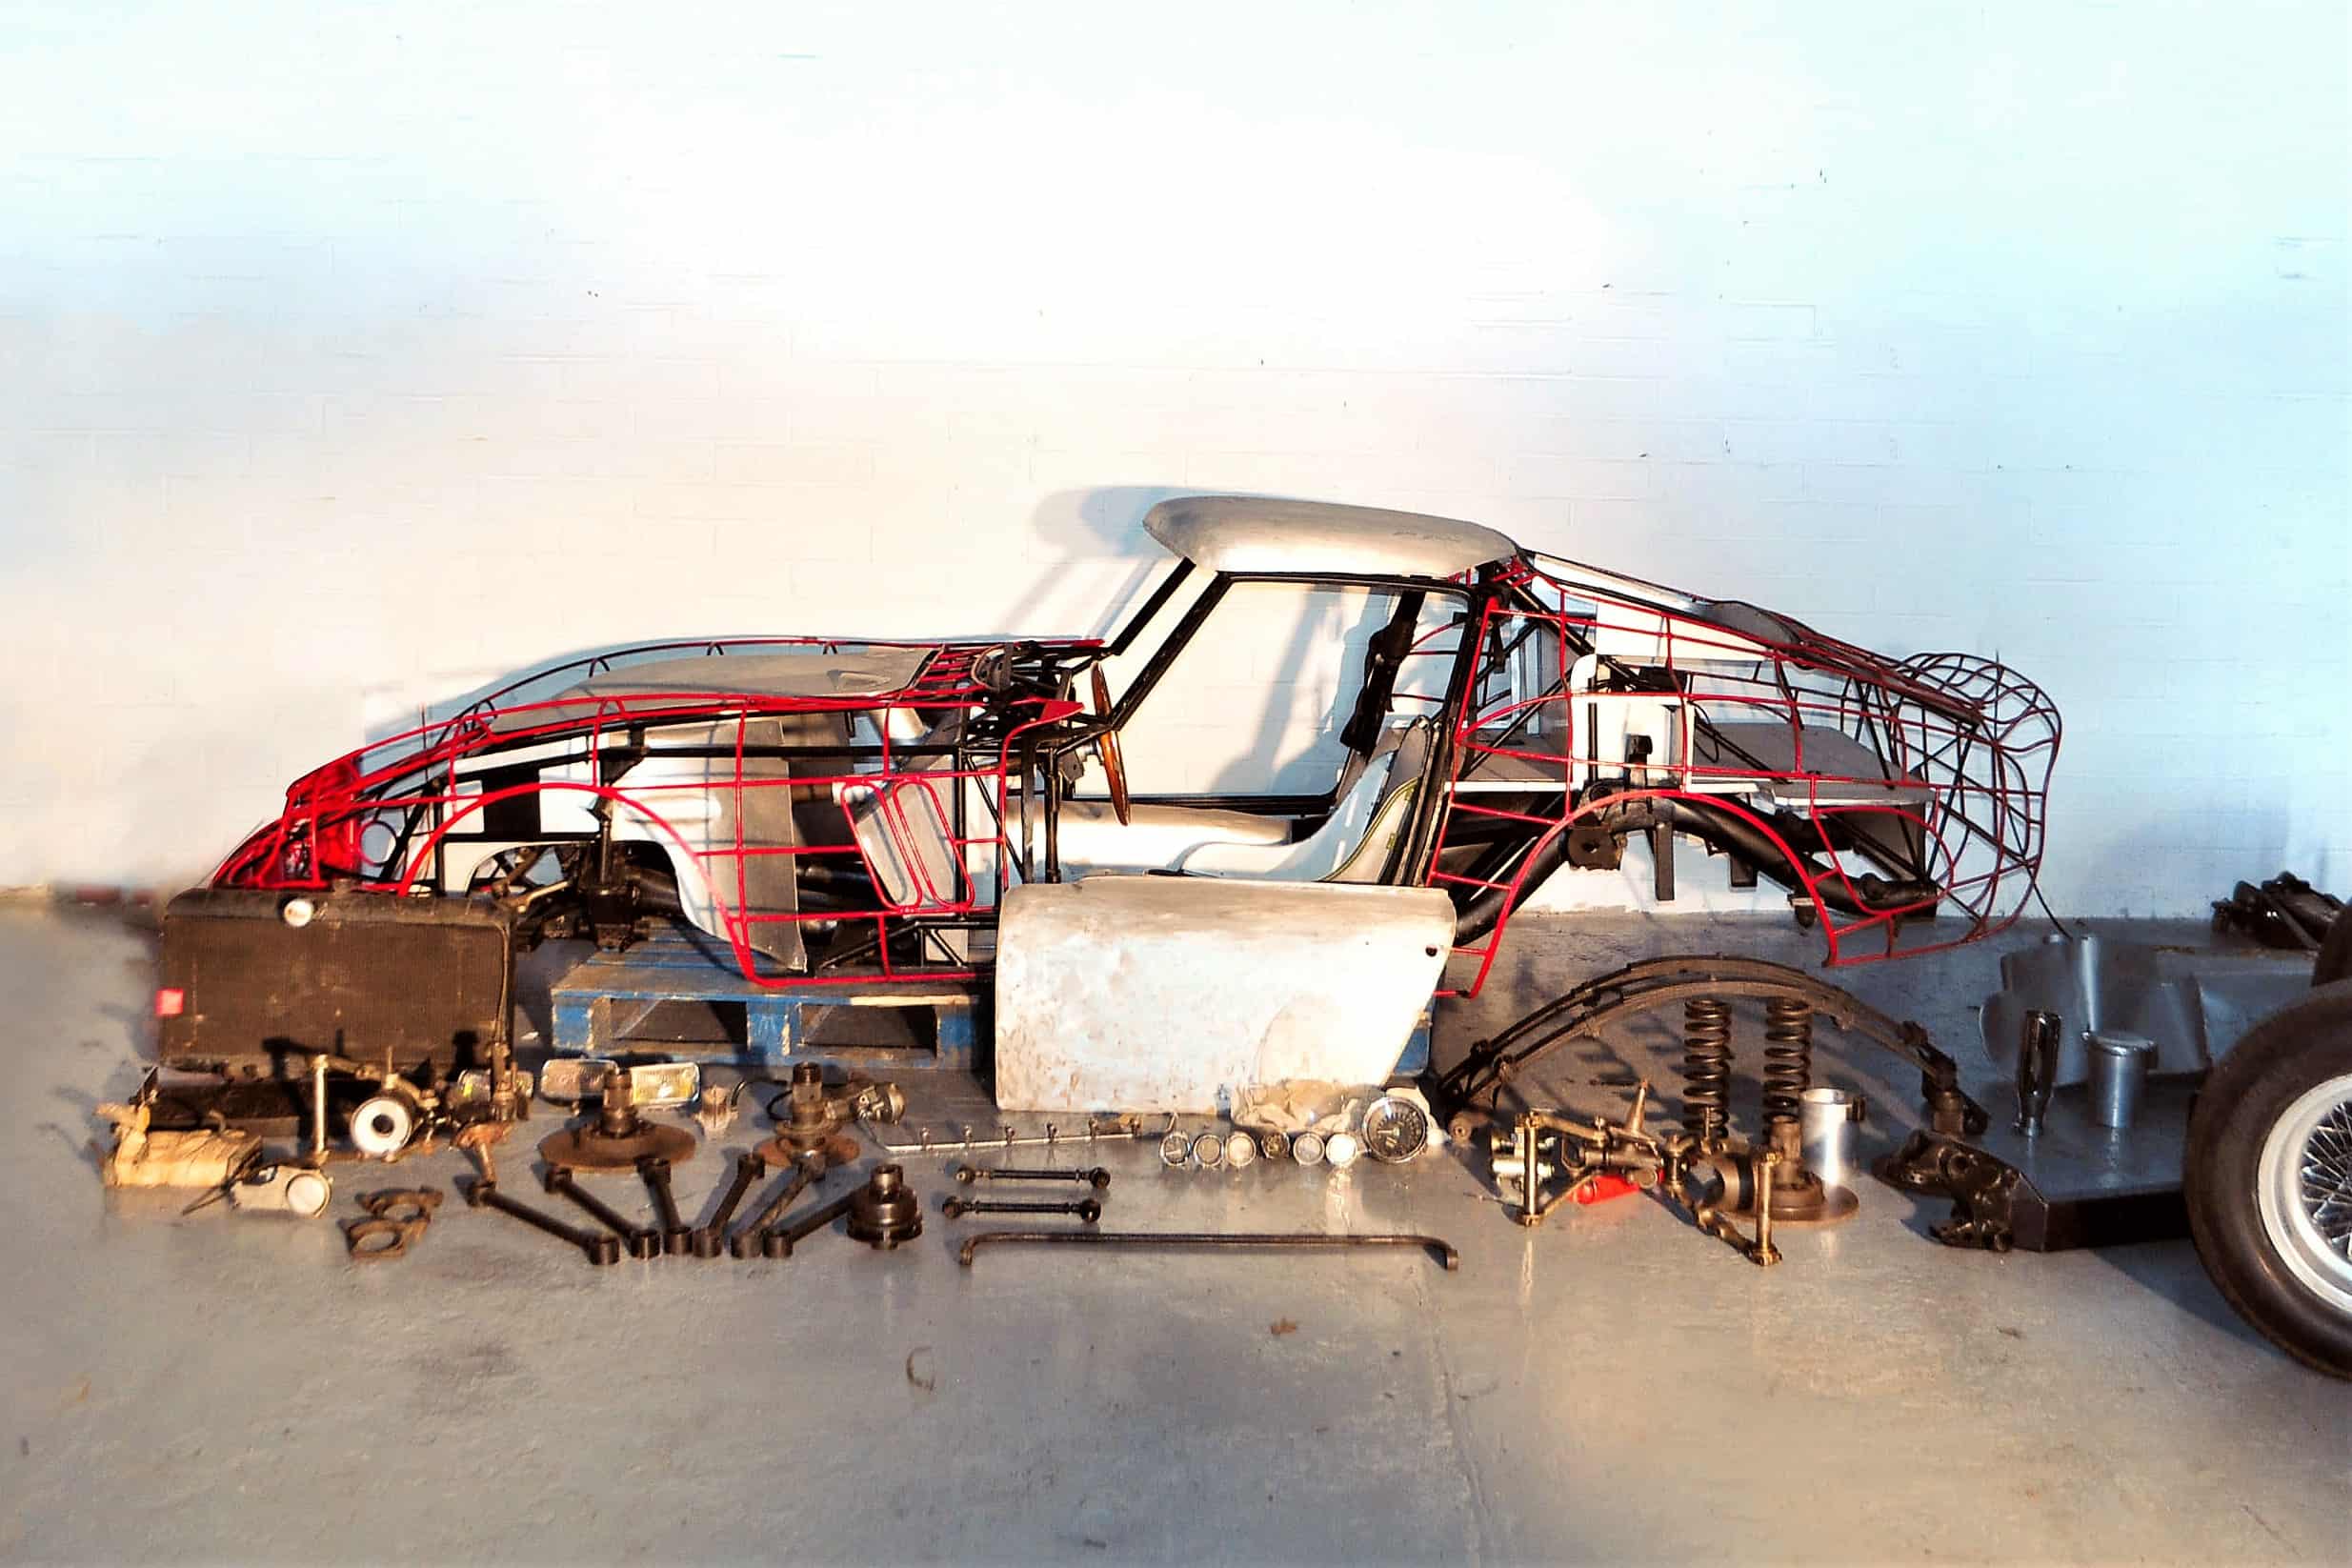 Many crucial Ferrari GTO parts are ready for the handy owner to build a complete one | Coys